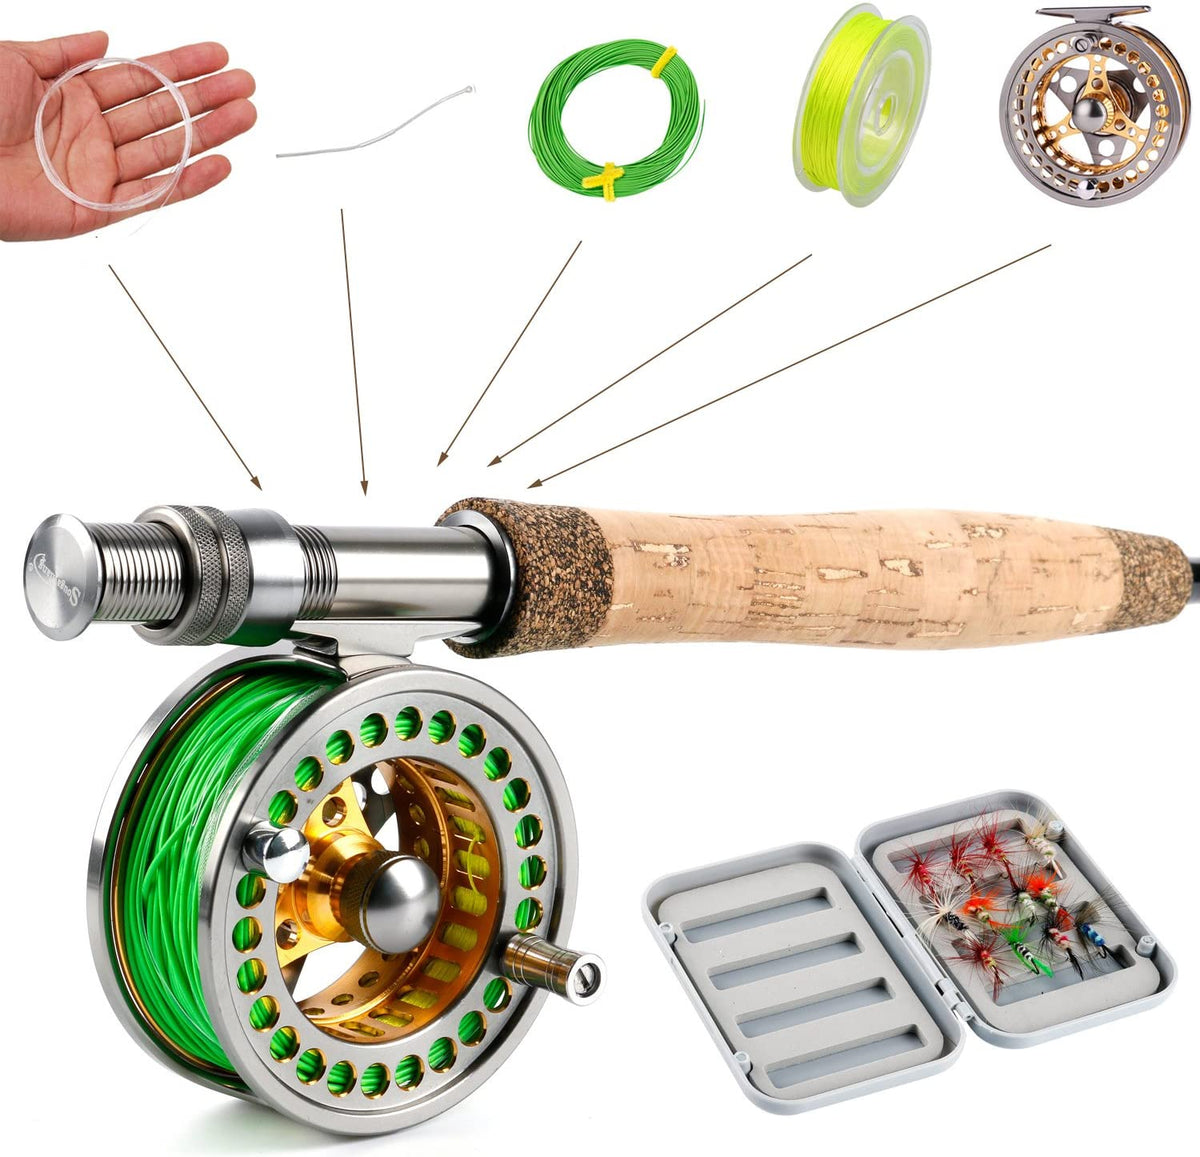 Sougayilang Fly Fishing Rod Reel Combos High Carbon Fly Rod With Black  Smooth Fly Reel Fishing Kit, Fly Fishing Complete Starter Package For  Saltwater Freshwater Fishing Set